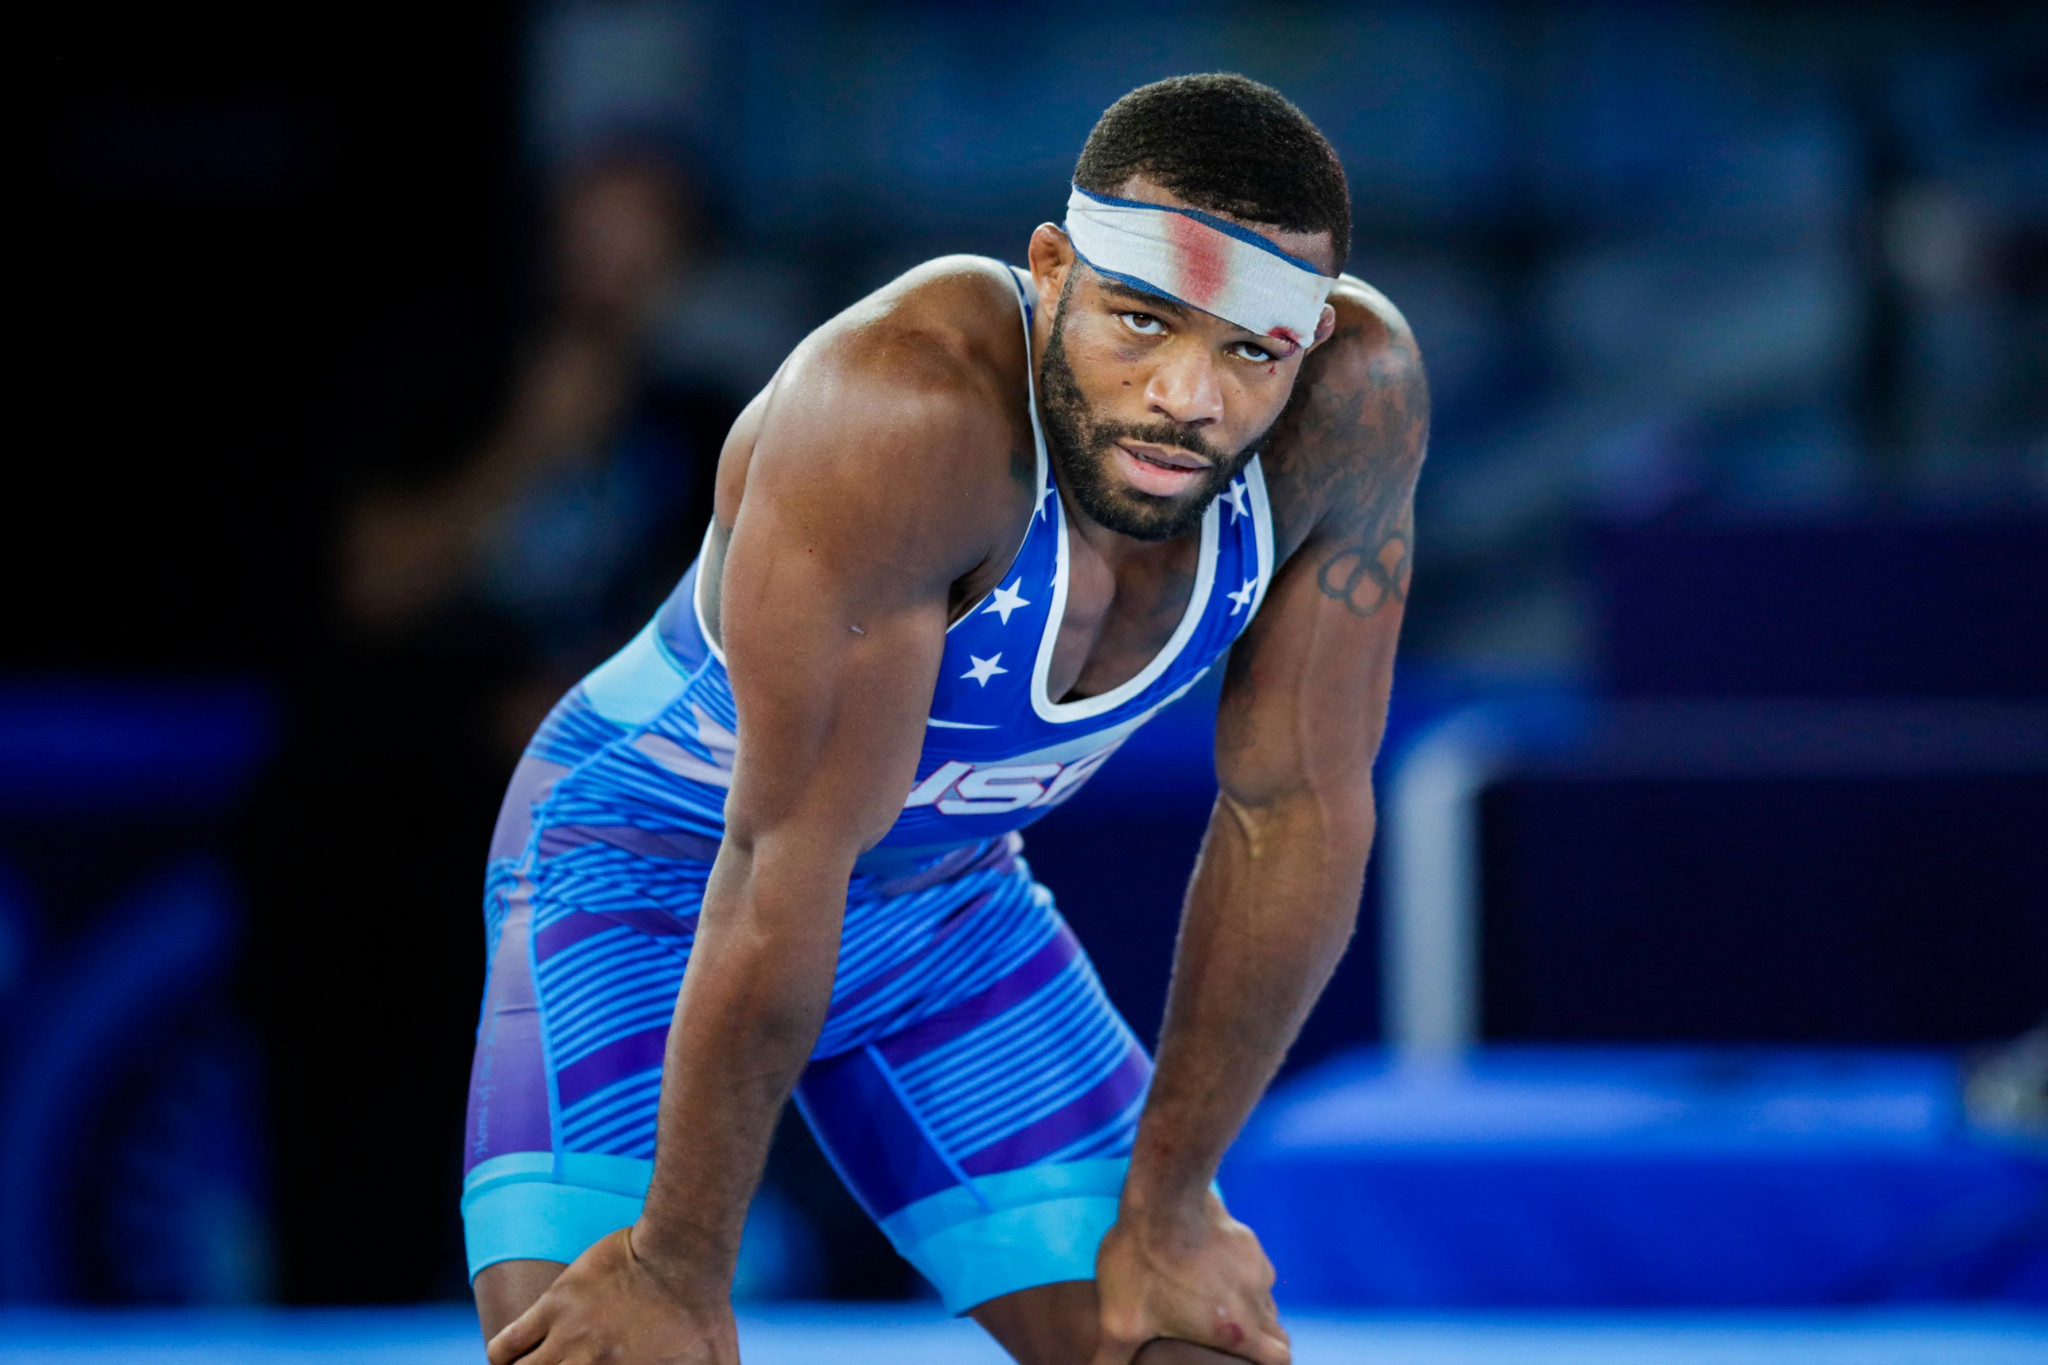 Americans hoping to dominate PanAmerican Wrestling Championships